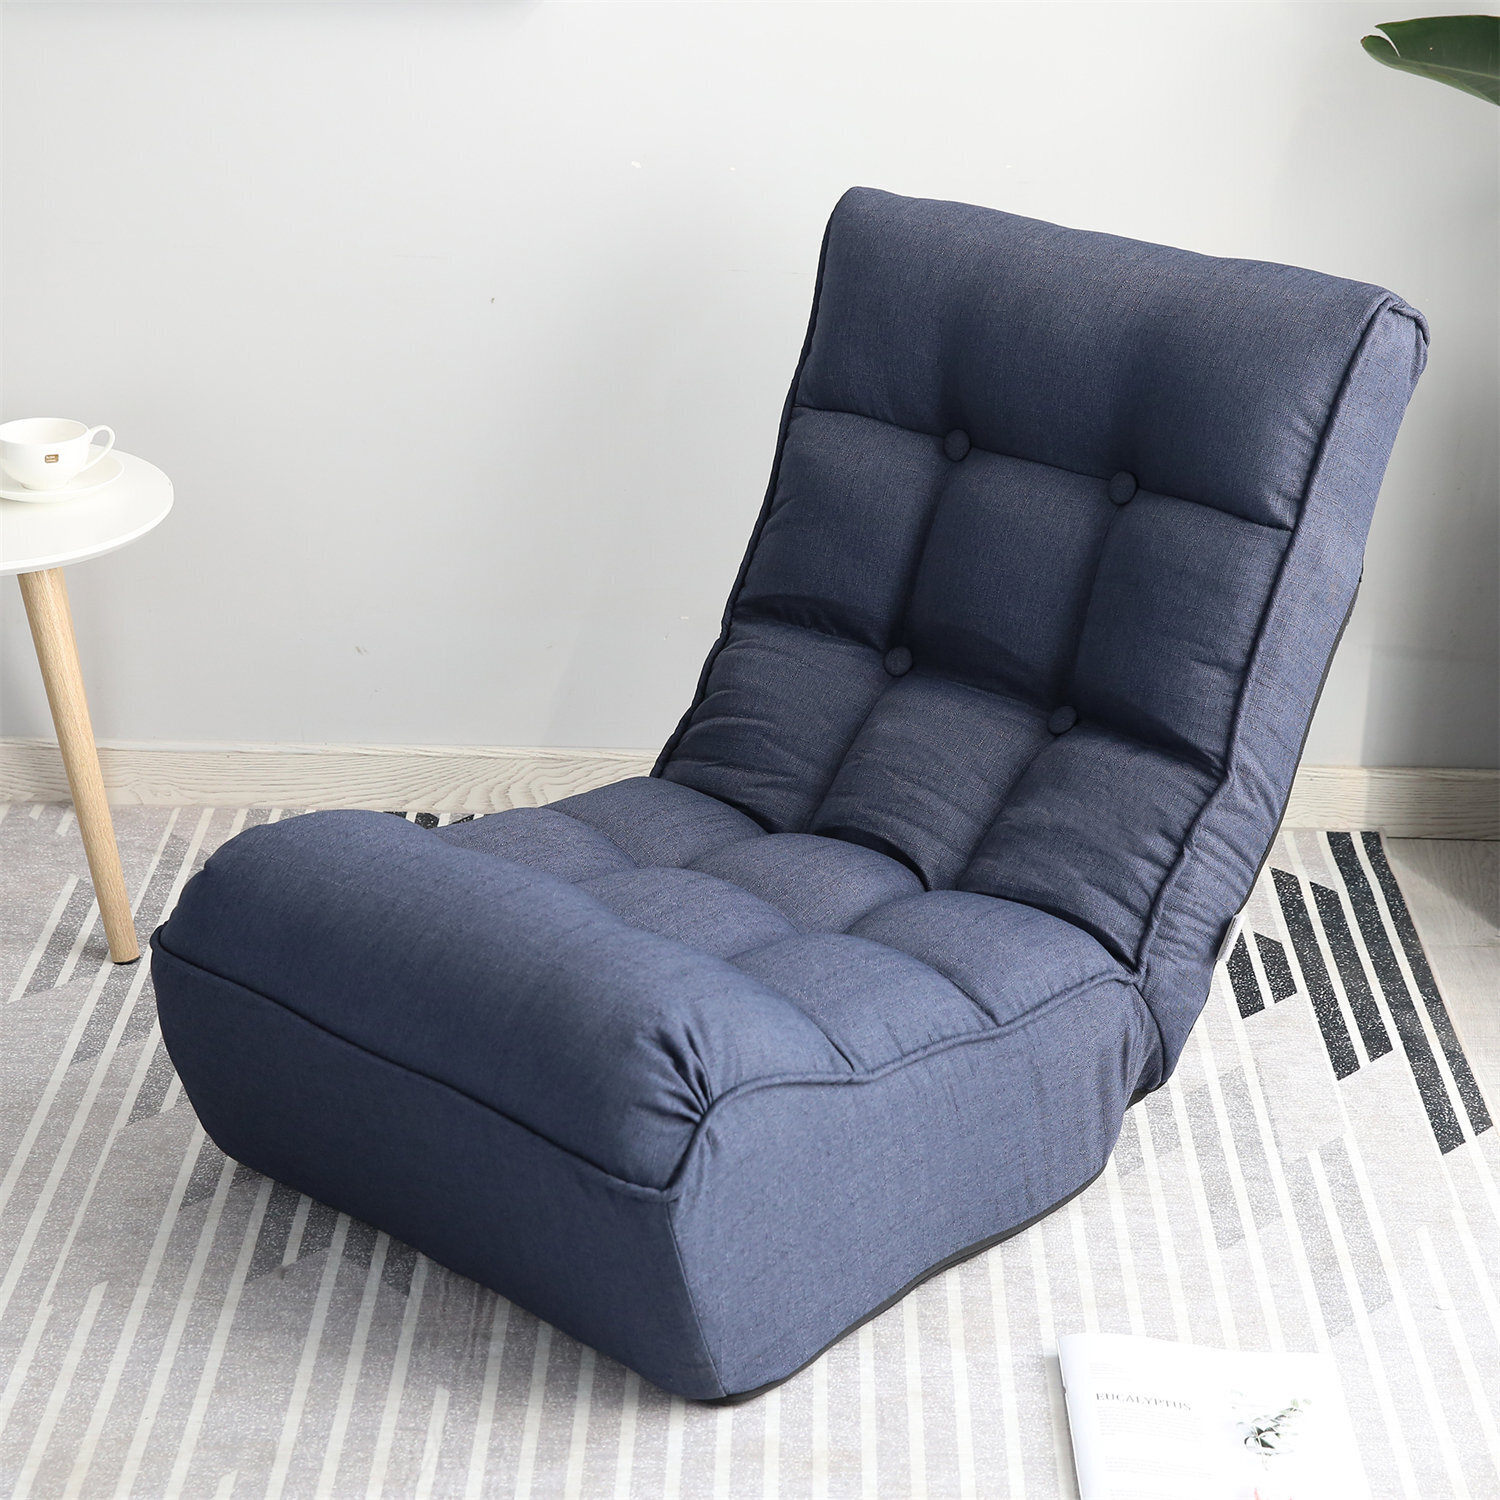 Multifunctional Oversized Reclining Chair